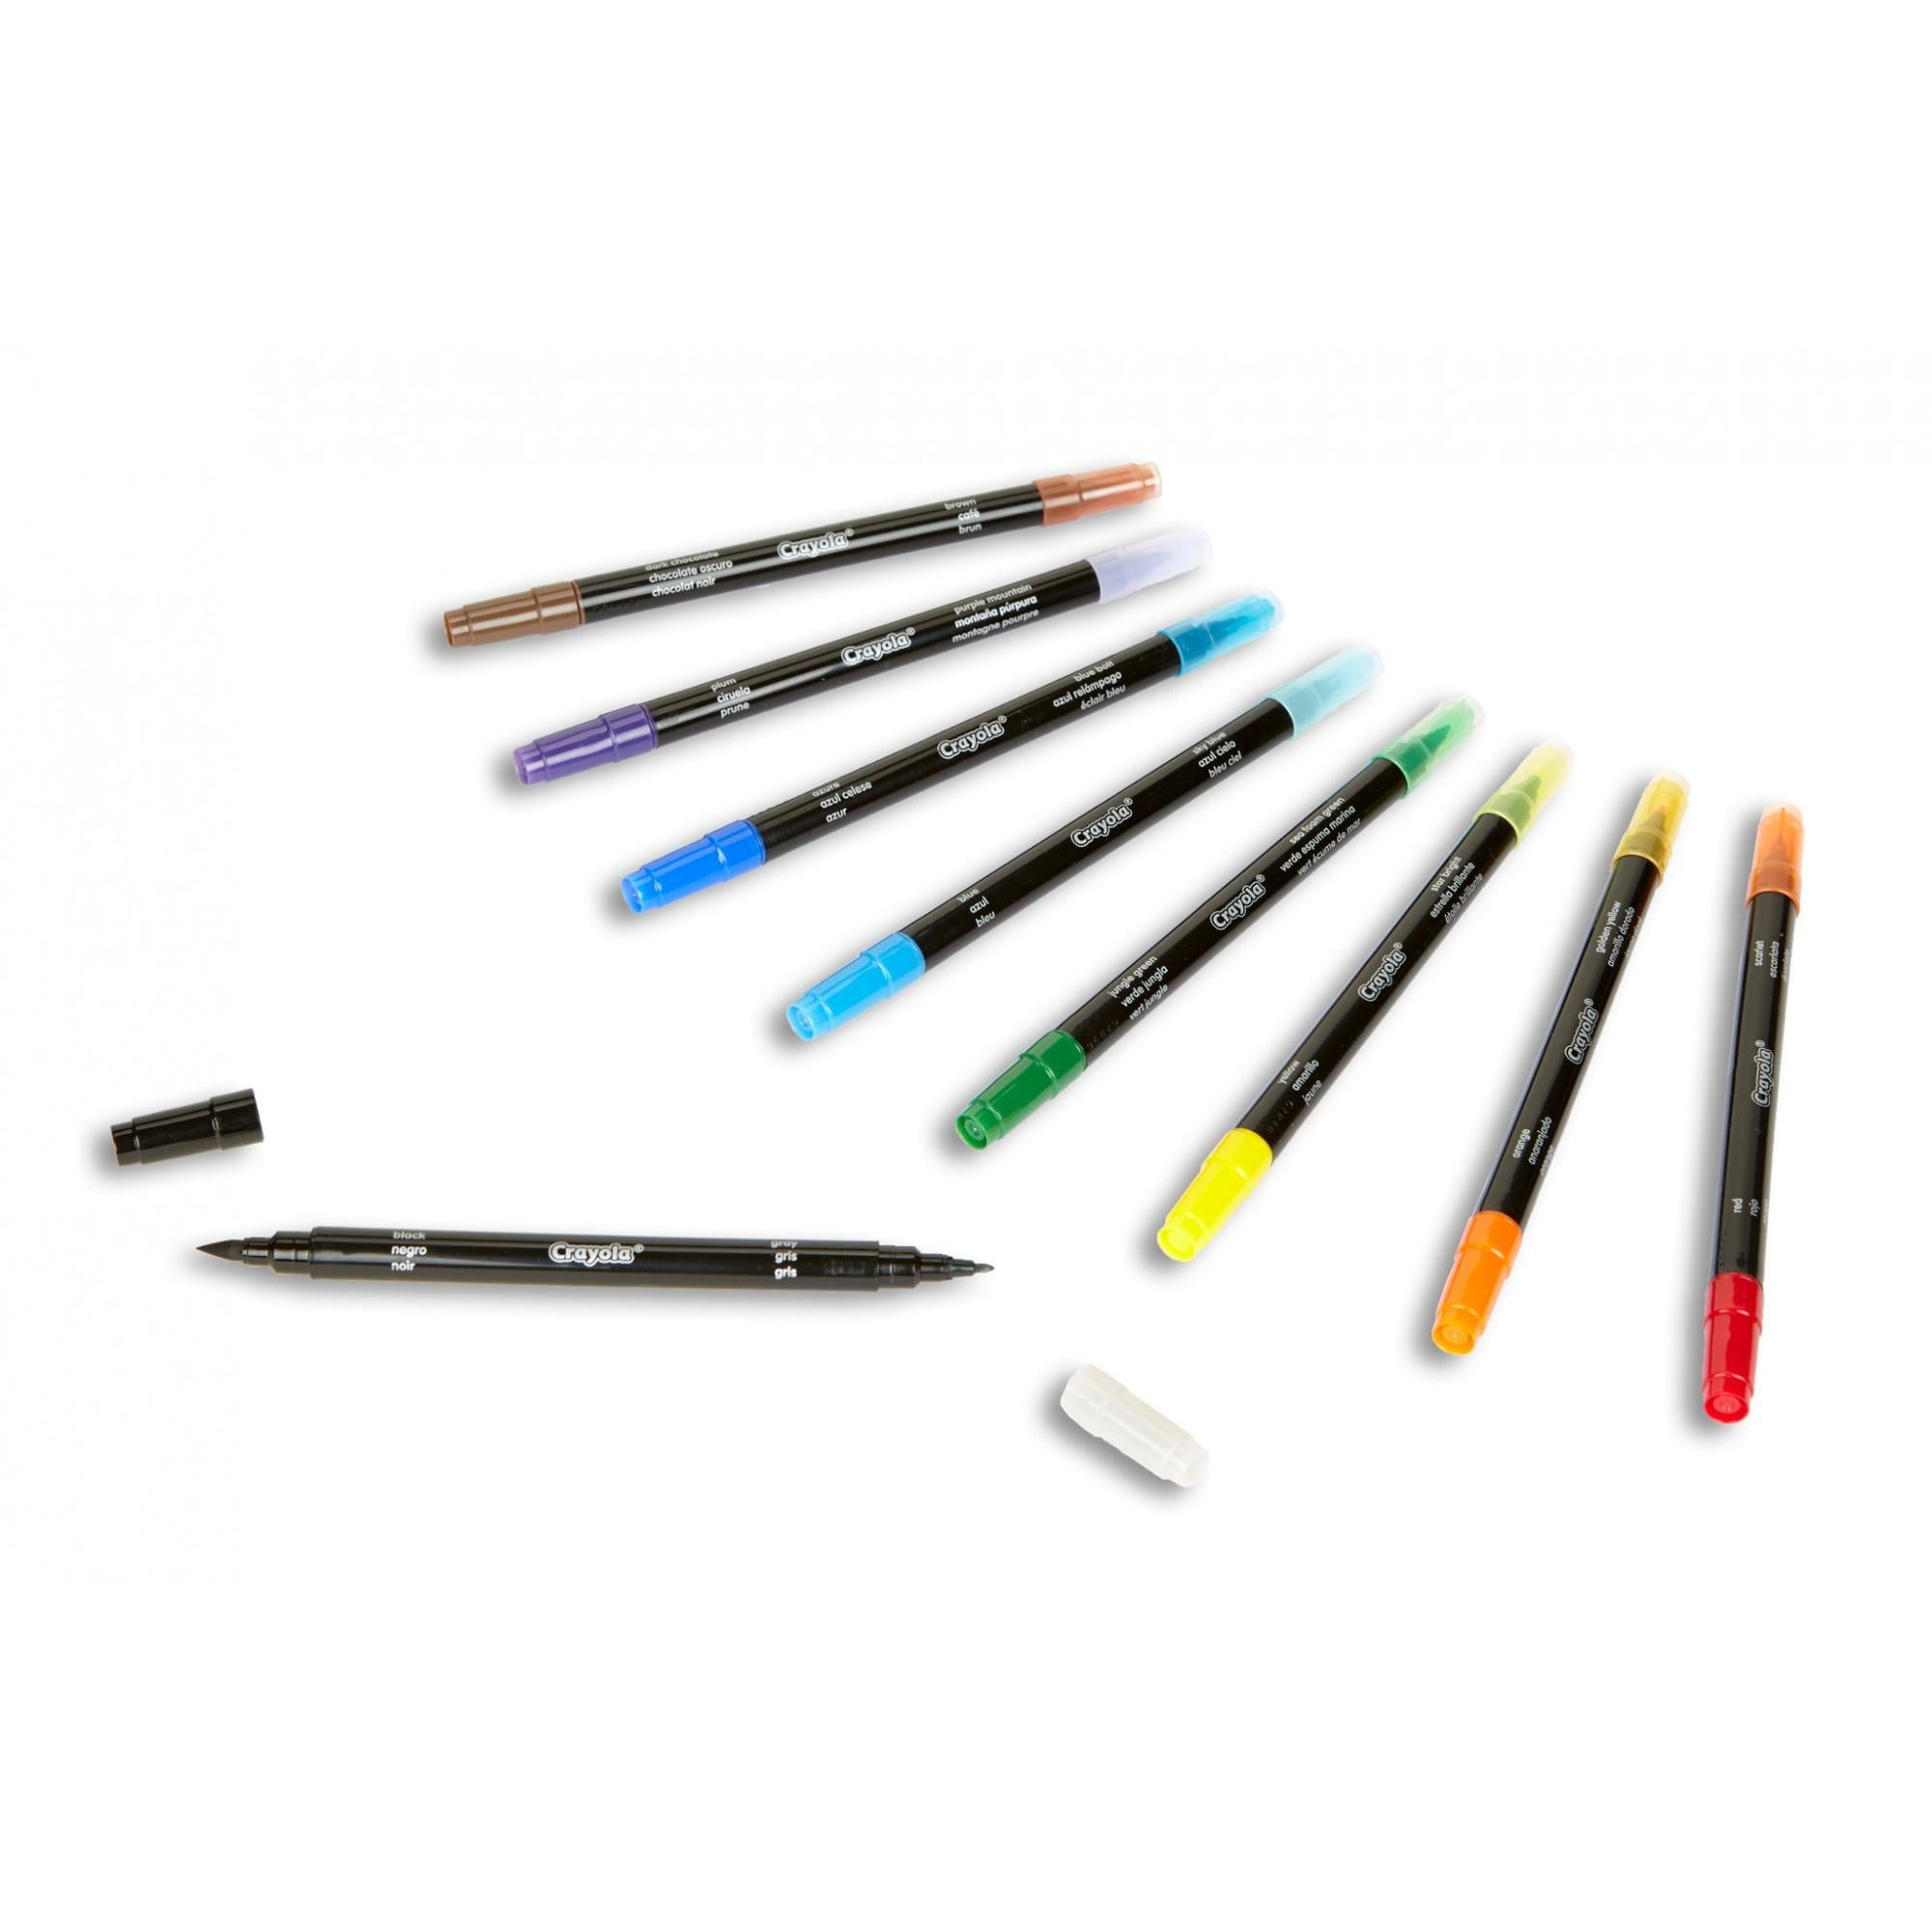 Lowest Price: Crayola Brush Markers, Dual-Tip with Ultra Fine Marker,  32 Colors, 16 Count